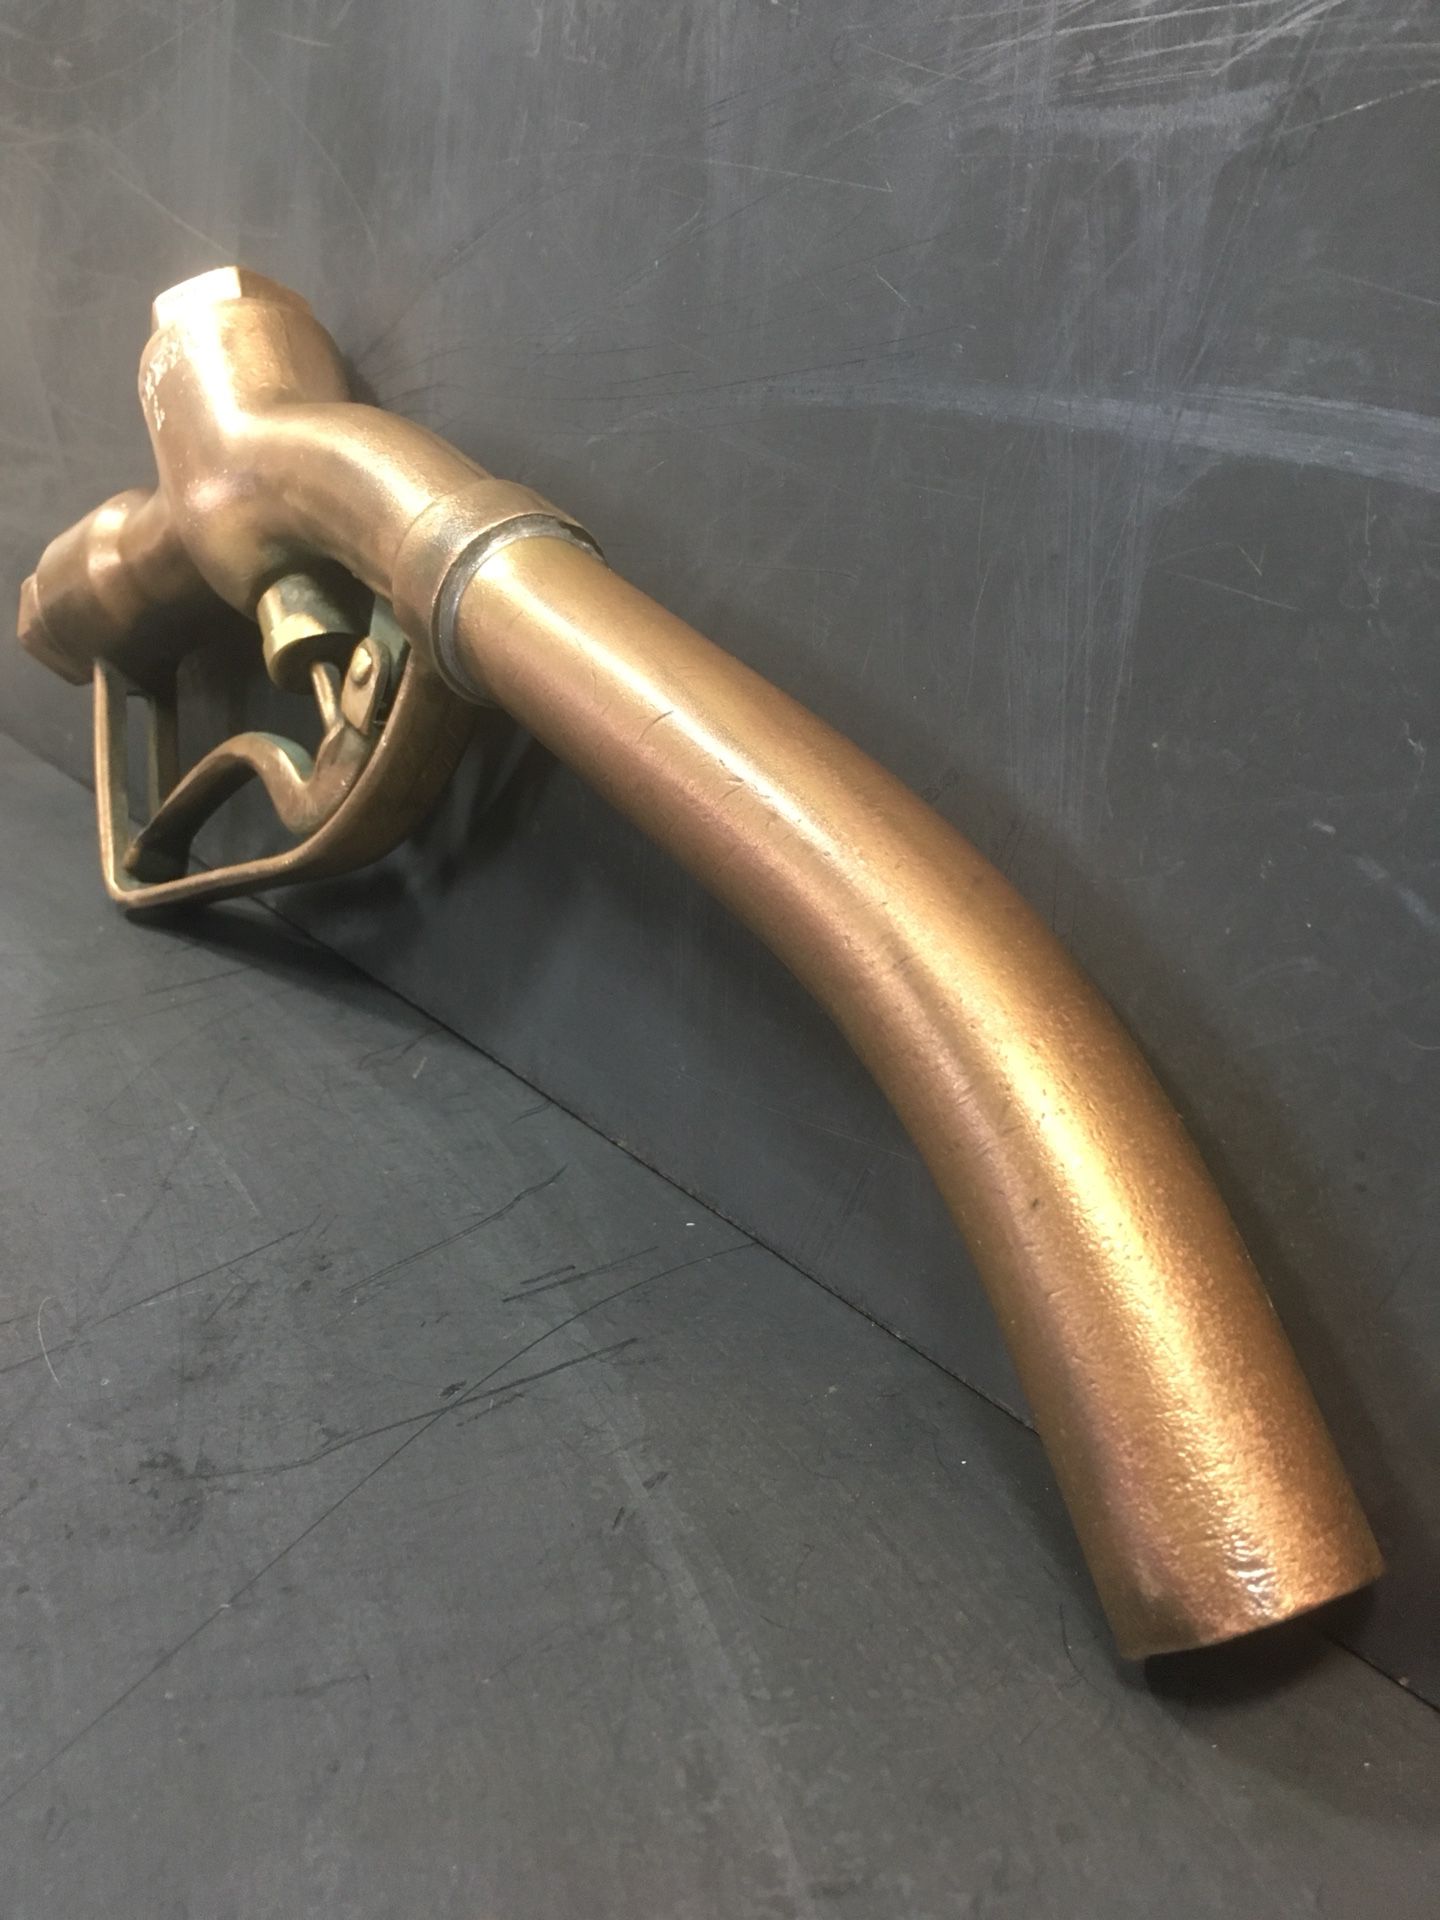 1926 Brass BUCKEYE gas pump nozzle handle for Sale in North Haven